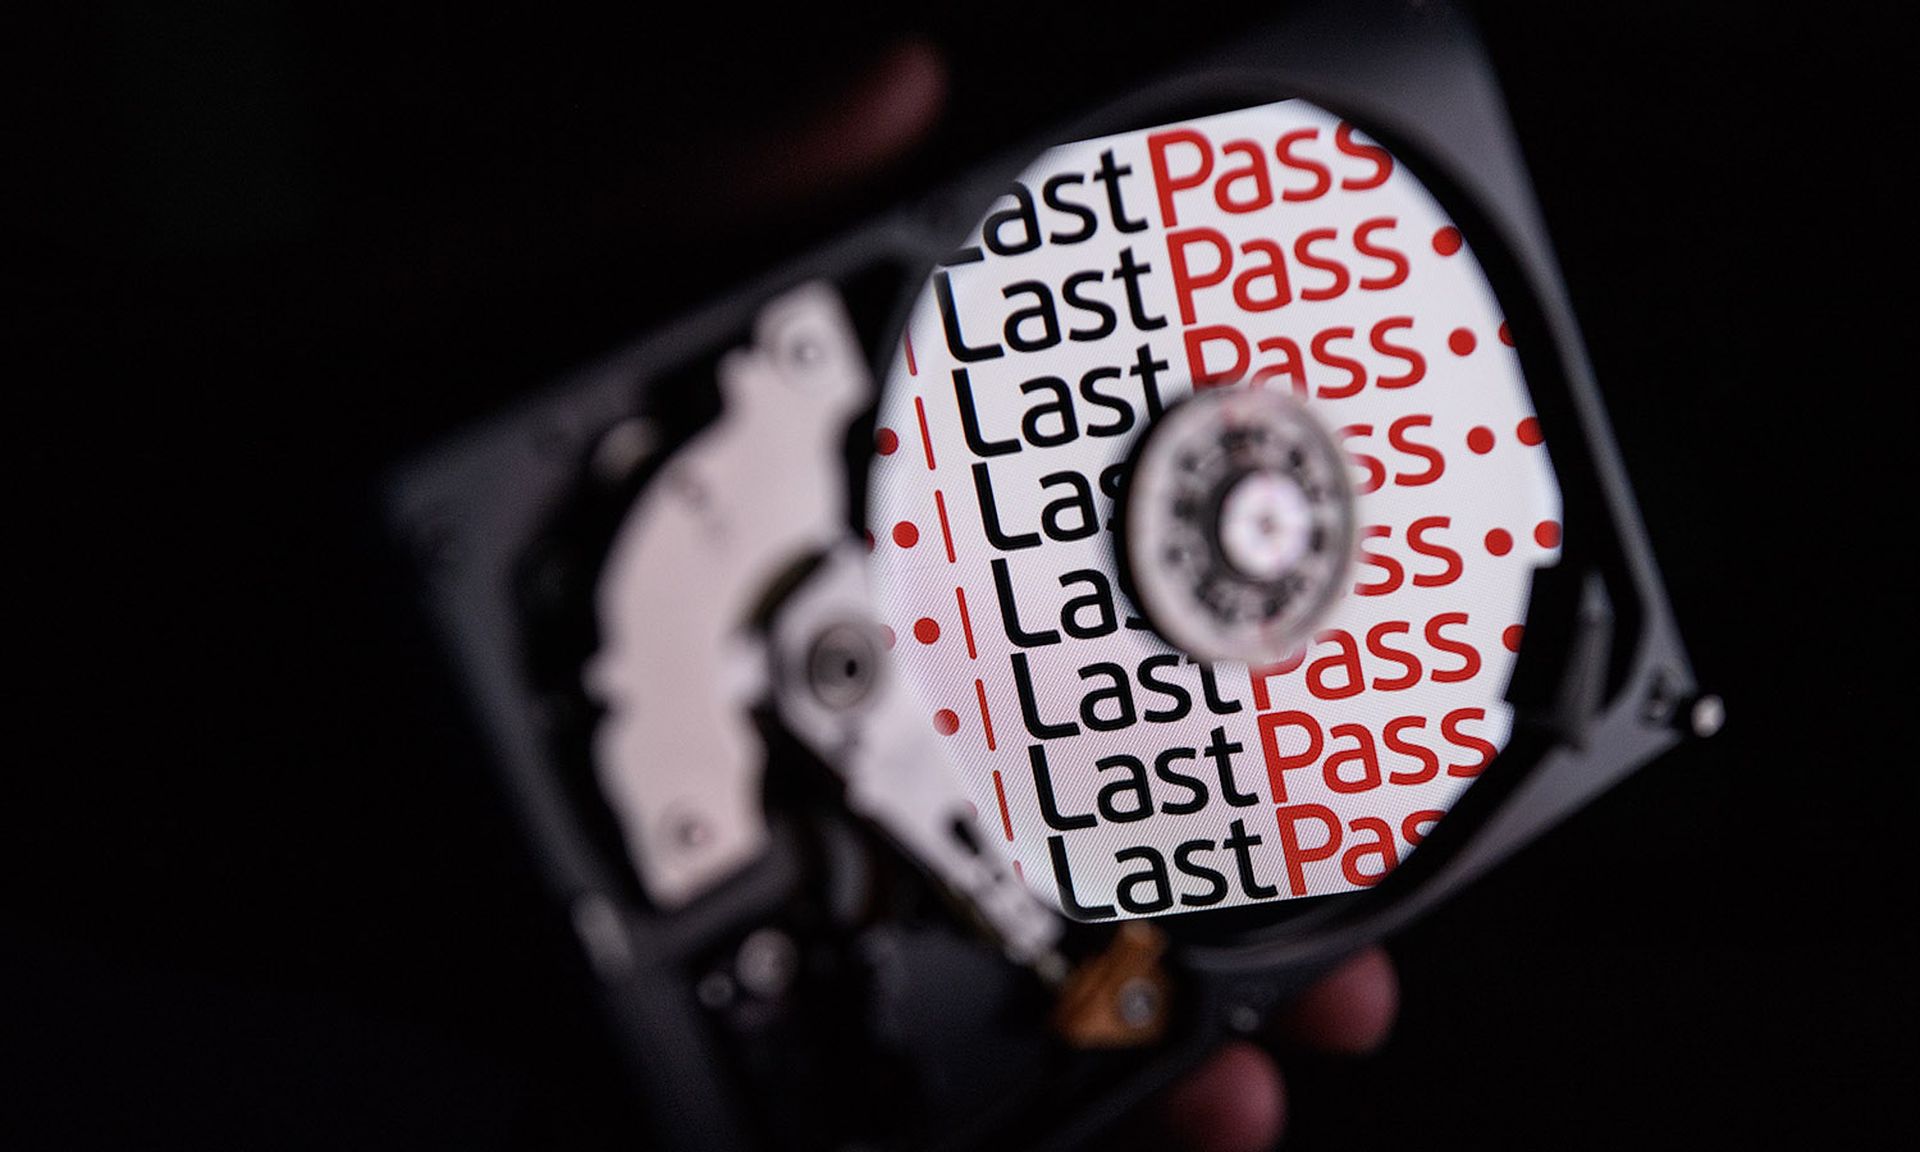 The logo for online password manager service LastPass is reflected on the internal discs of a hard drive.